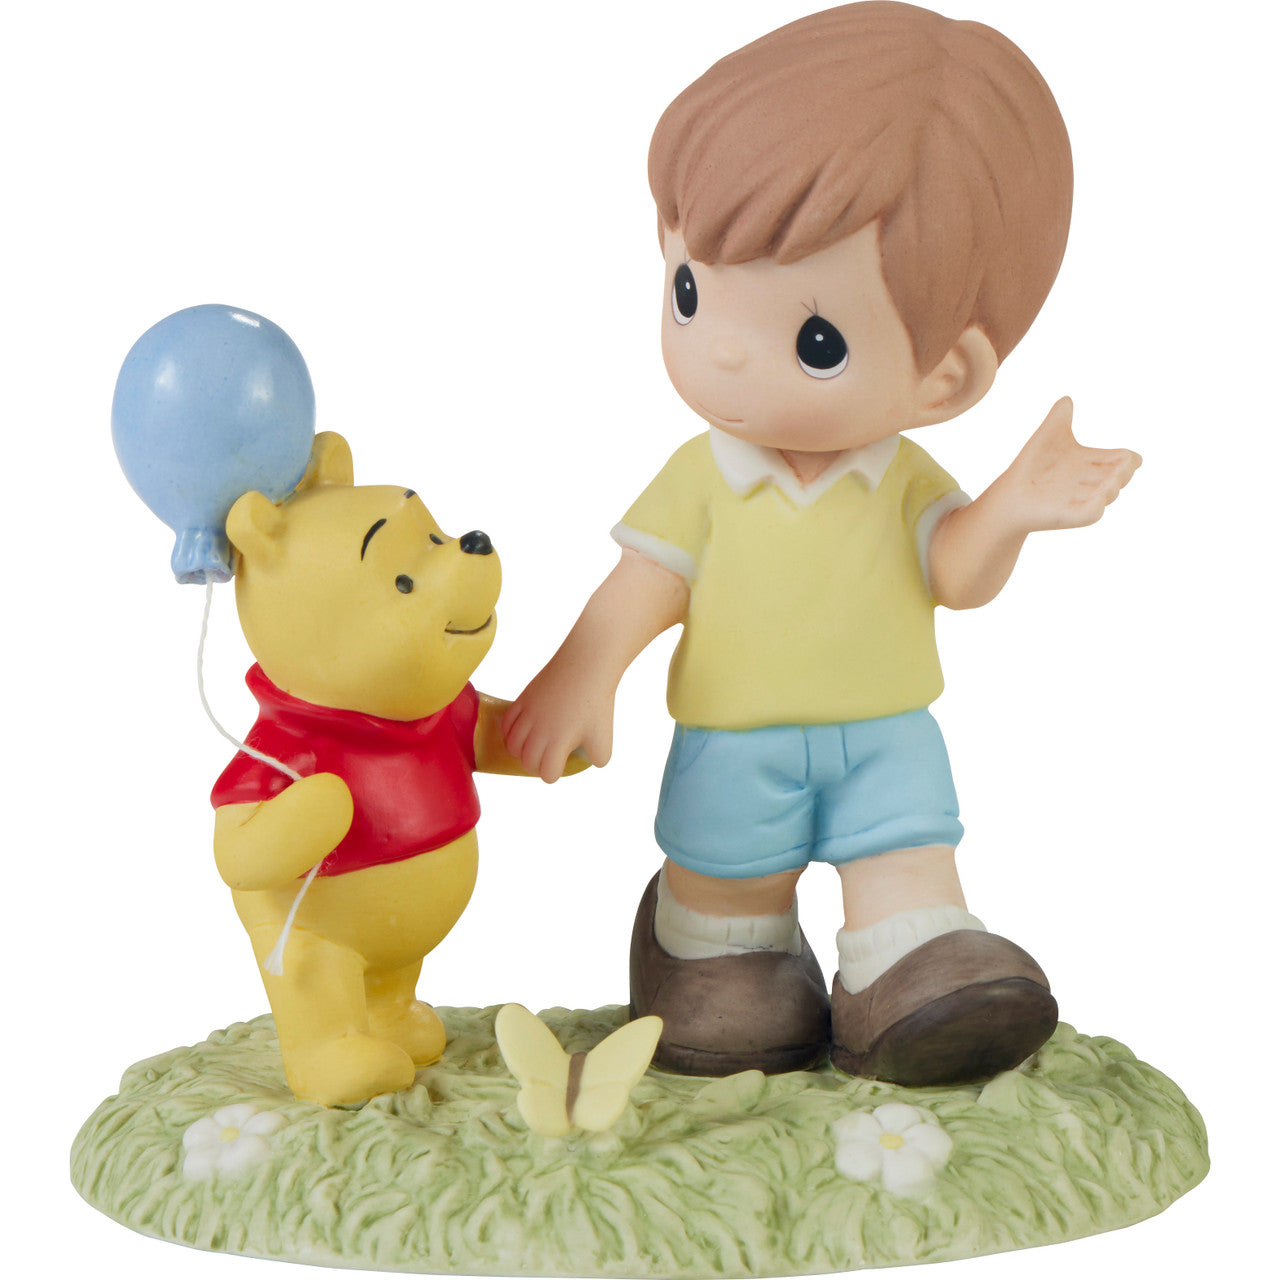 It's Always An Adventure With You Disney Precious Moments Figurine